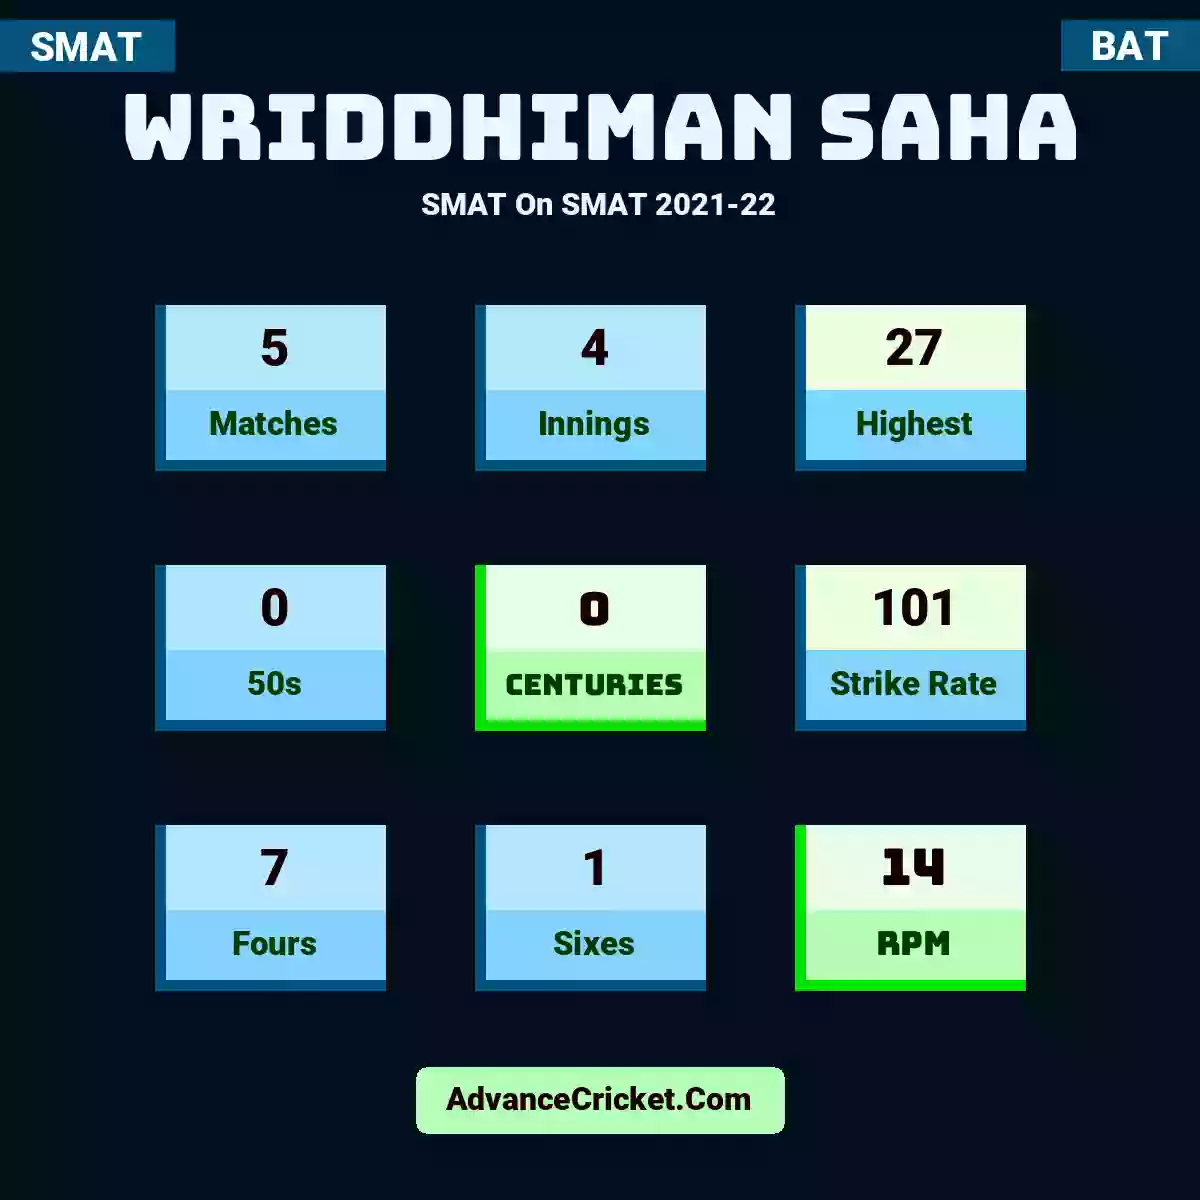 Wriddhiman Saha SMAT  On SMAT 2021-22, Wriddhiman Saha played 5 matches, scored 27 runs as highest, 0 half-centuries, and 0 centuries, with a strike rate of 101. W.Saha hit 7 fours and 1 sixes, with an RPM of 14.